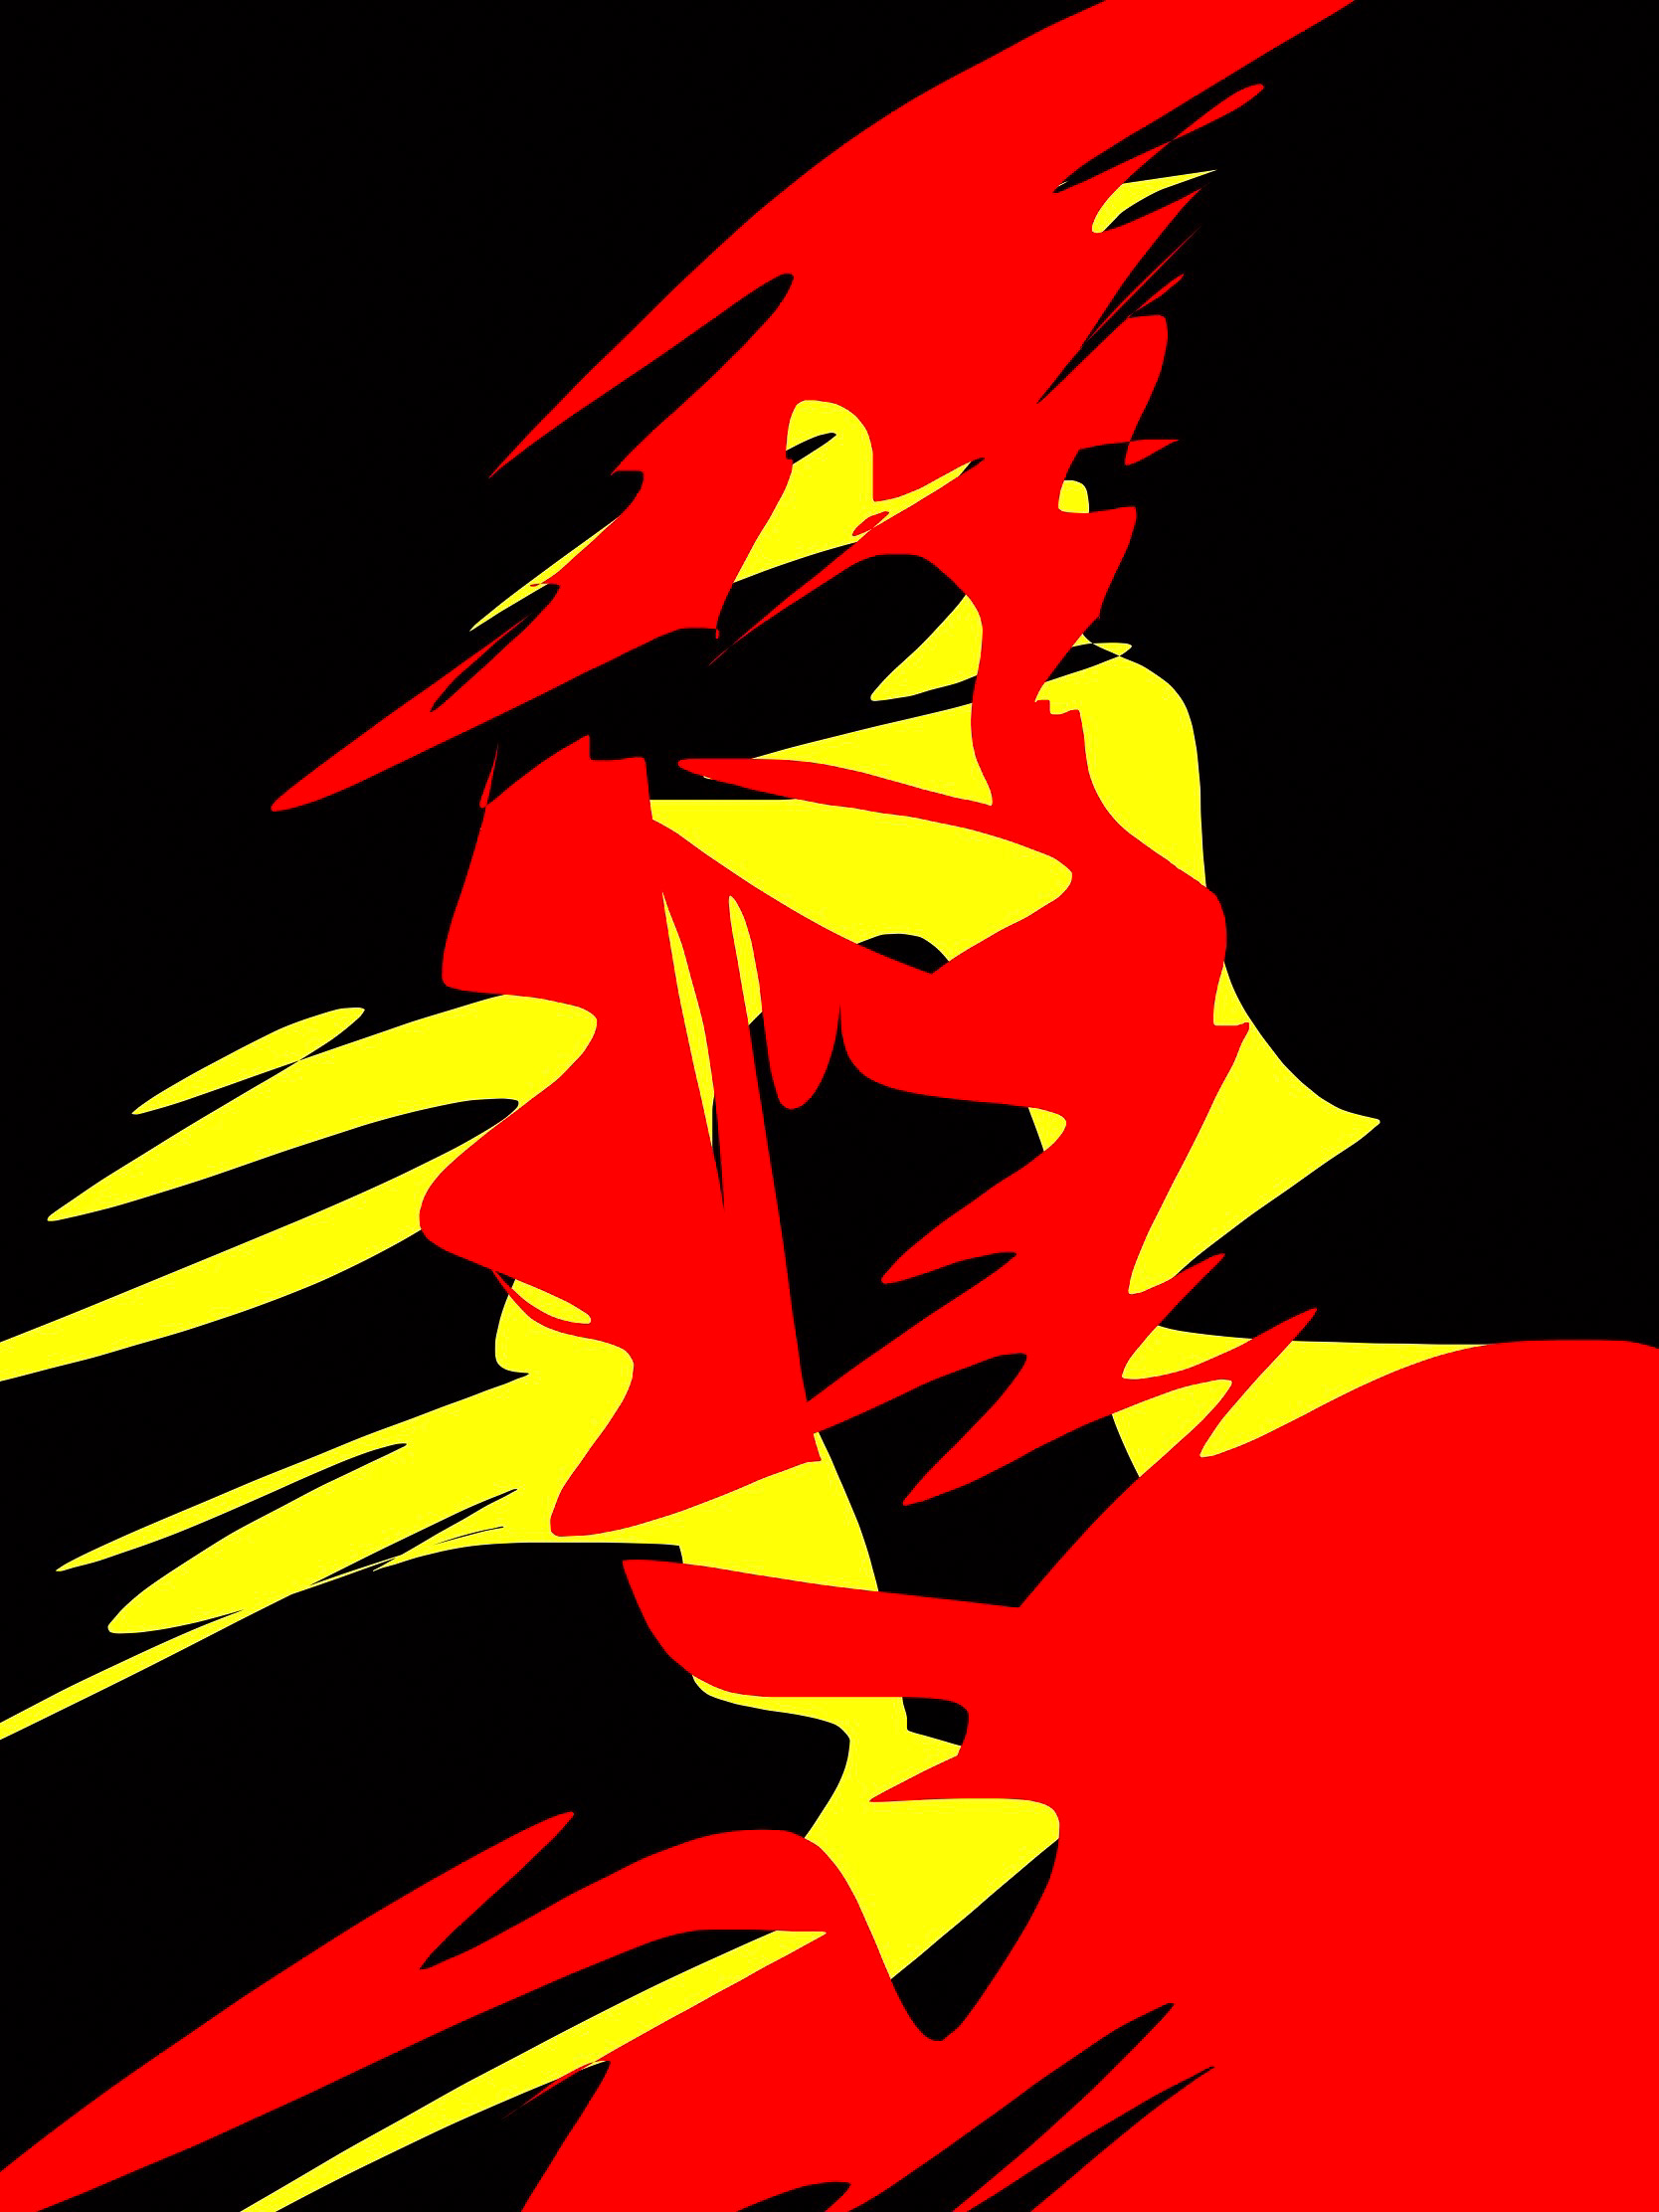 Spartan red yellow abstract